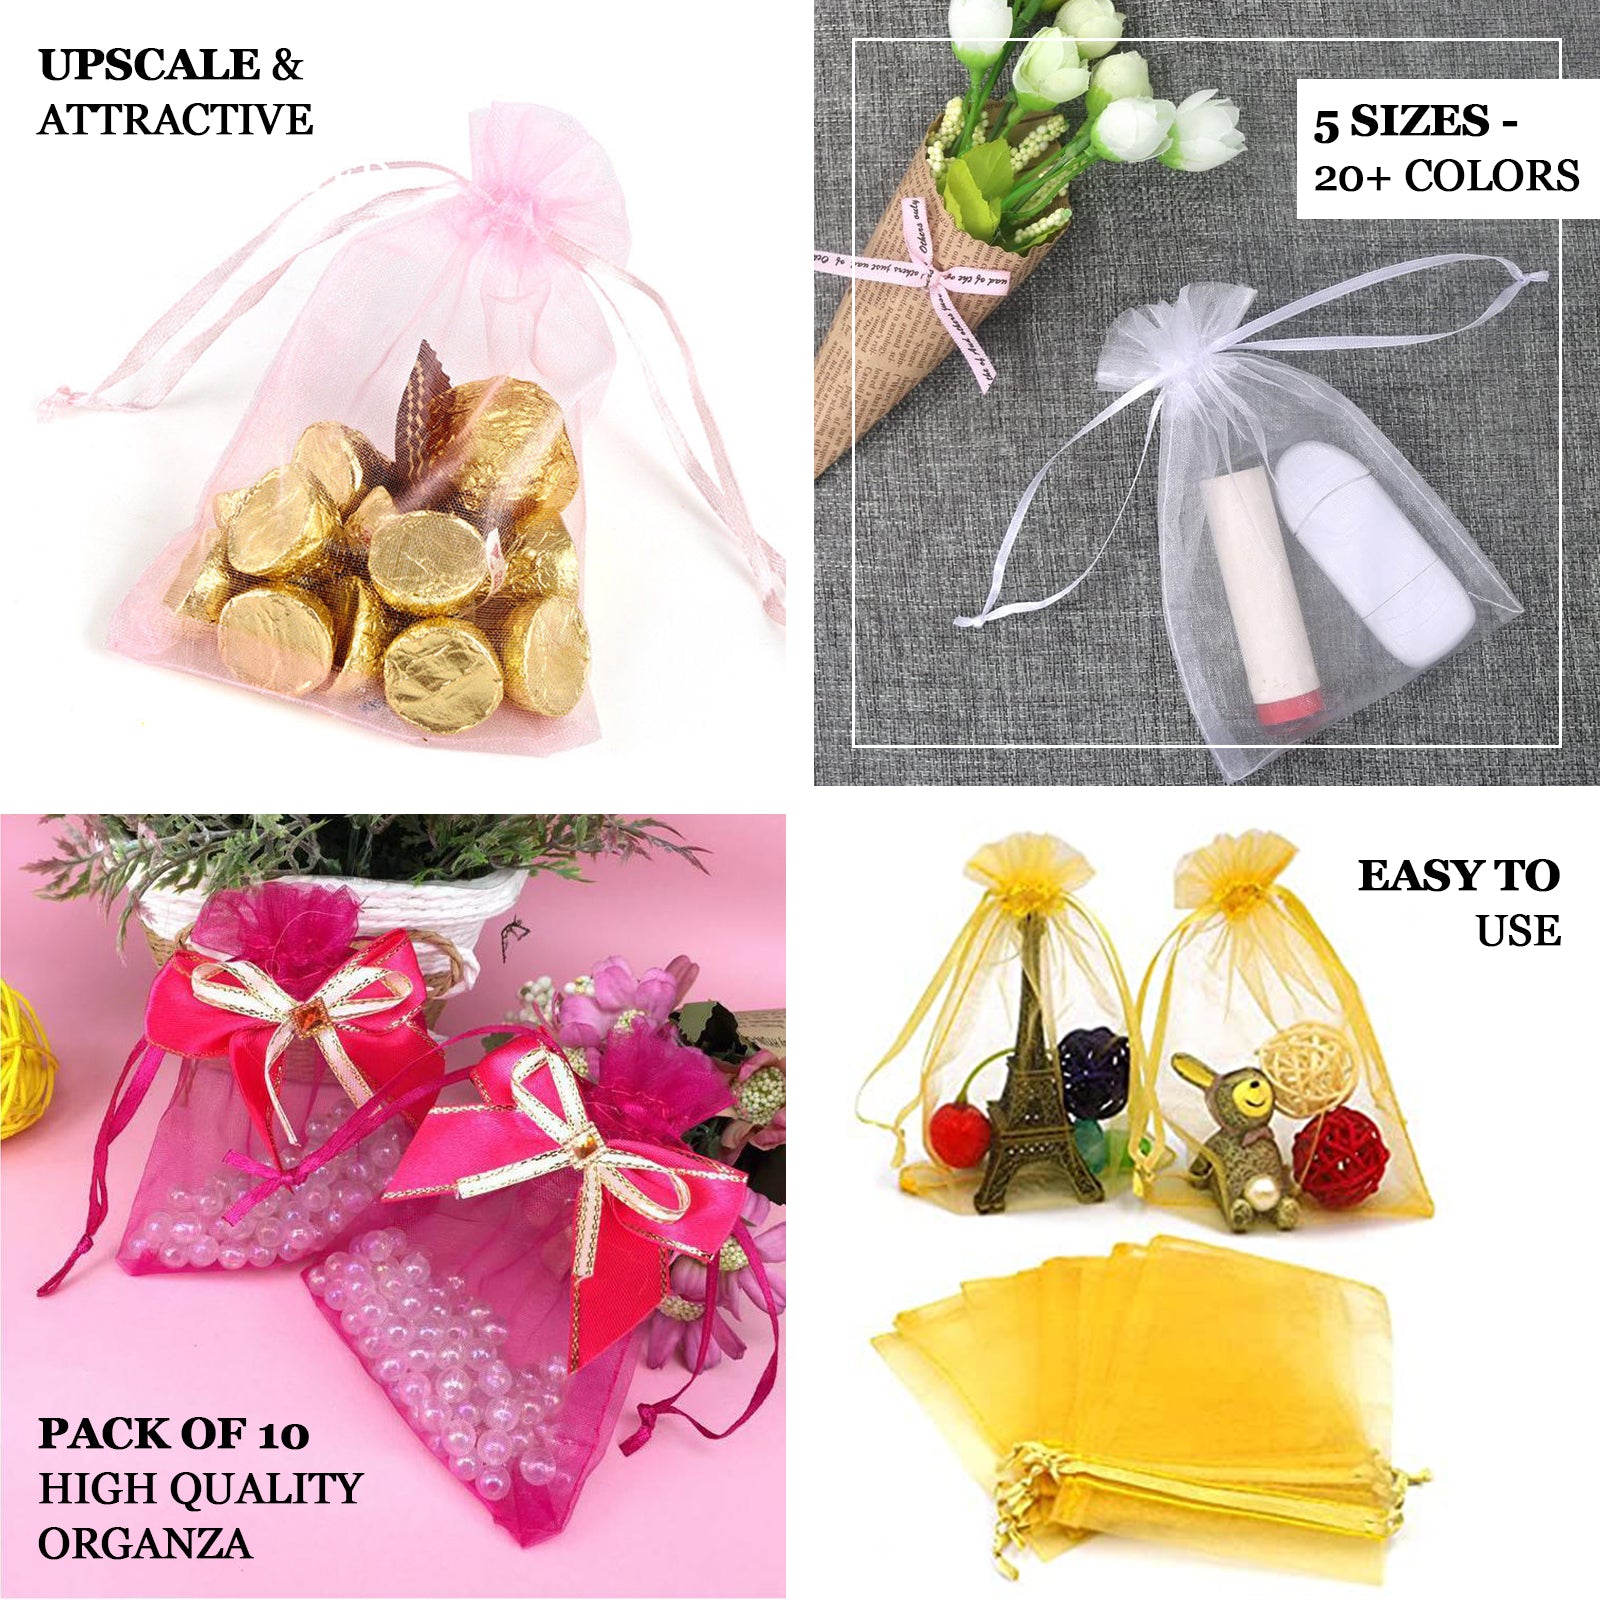 Efavormart 50PCS YELLOW Organza Gift Bag Drawstring Pouch Wedding Favors Bridal Shower Treat Jewelry Bags - 5"x7" - image 4 of 11